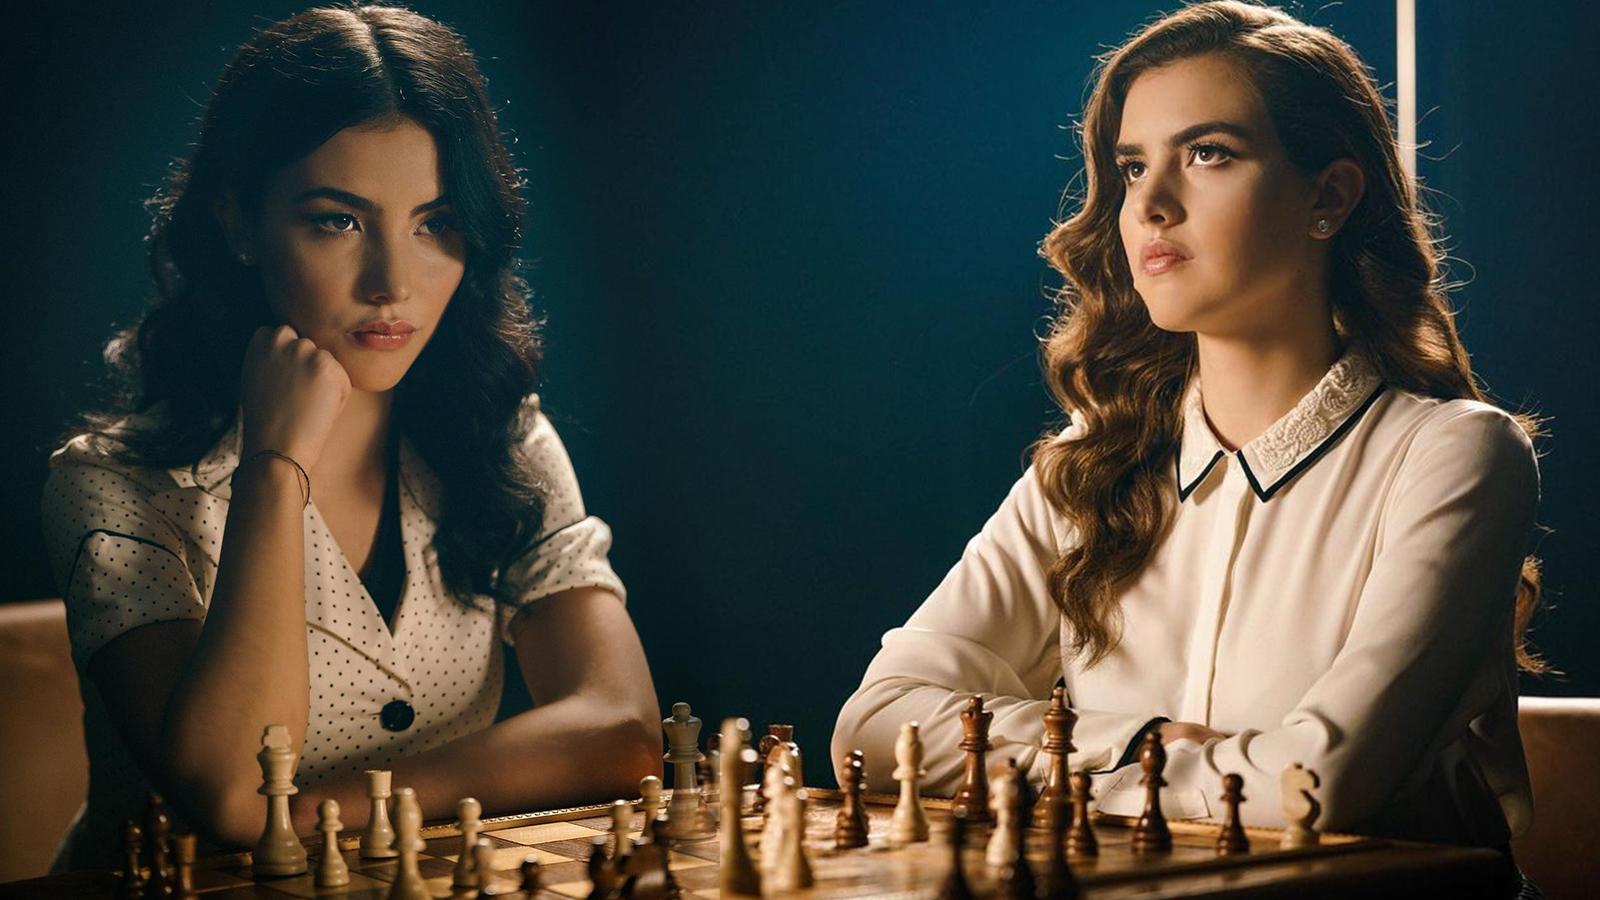 Big Brother alum tries to date chess star Andrea Botez